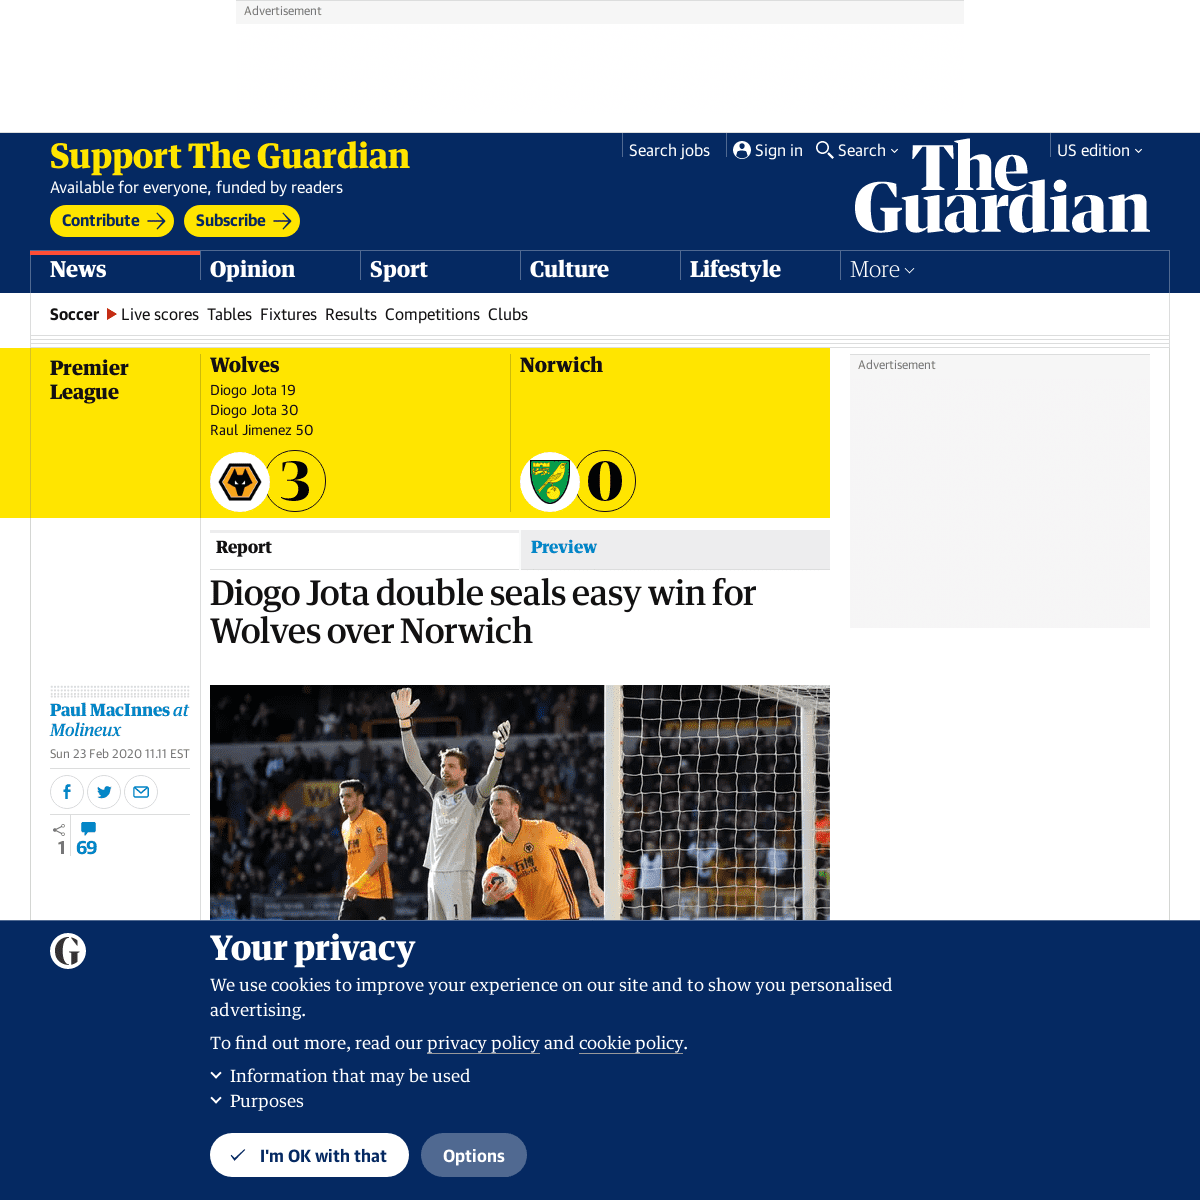 A complete backup of www.theguardian.com/football/2020/feb/23/wolves-norwich-premier-league-match-report